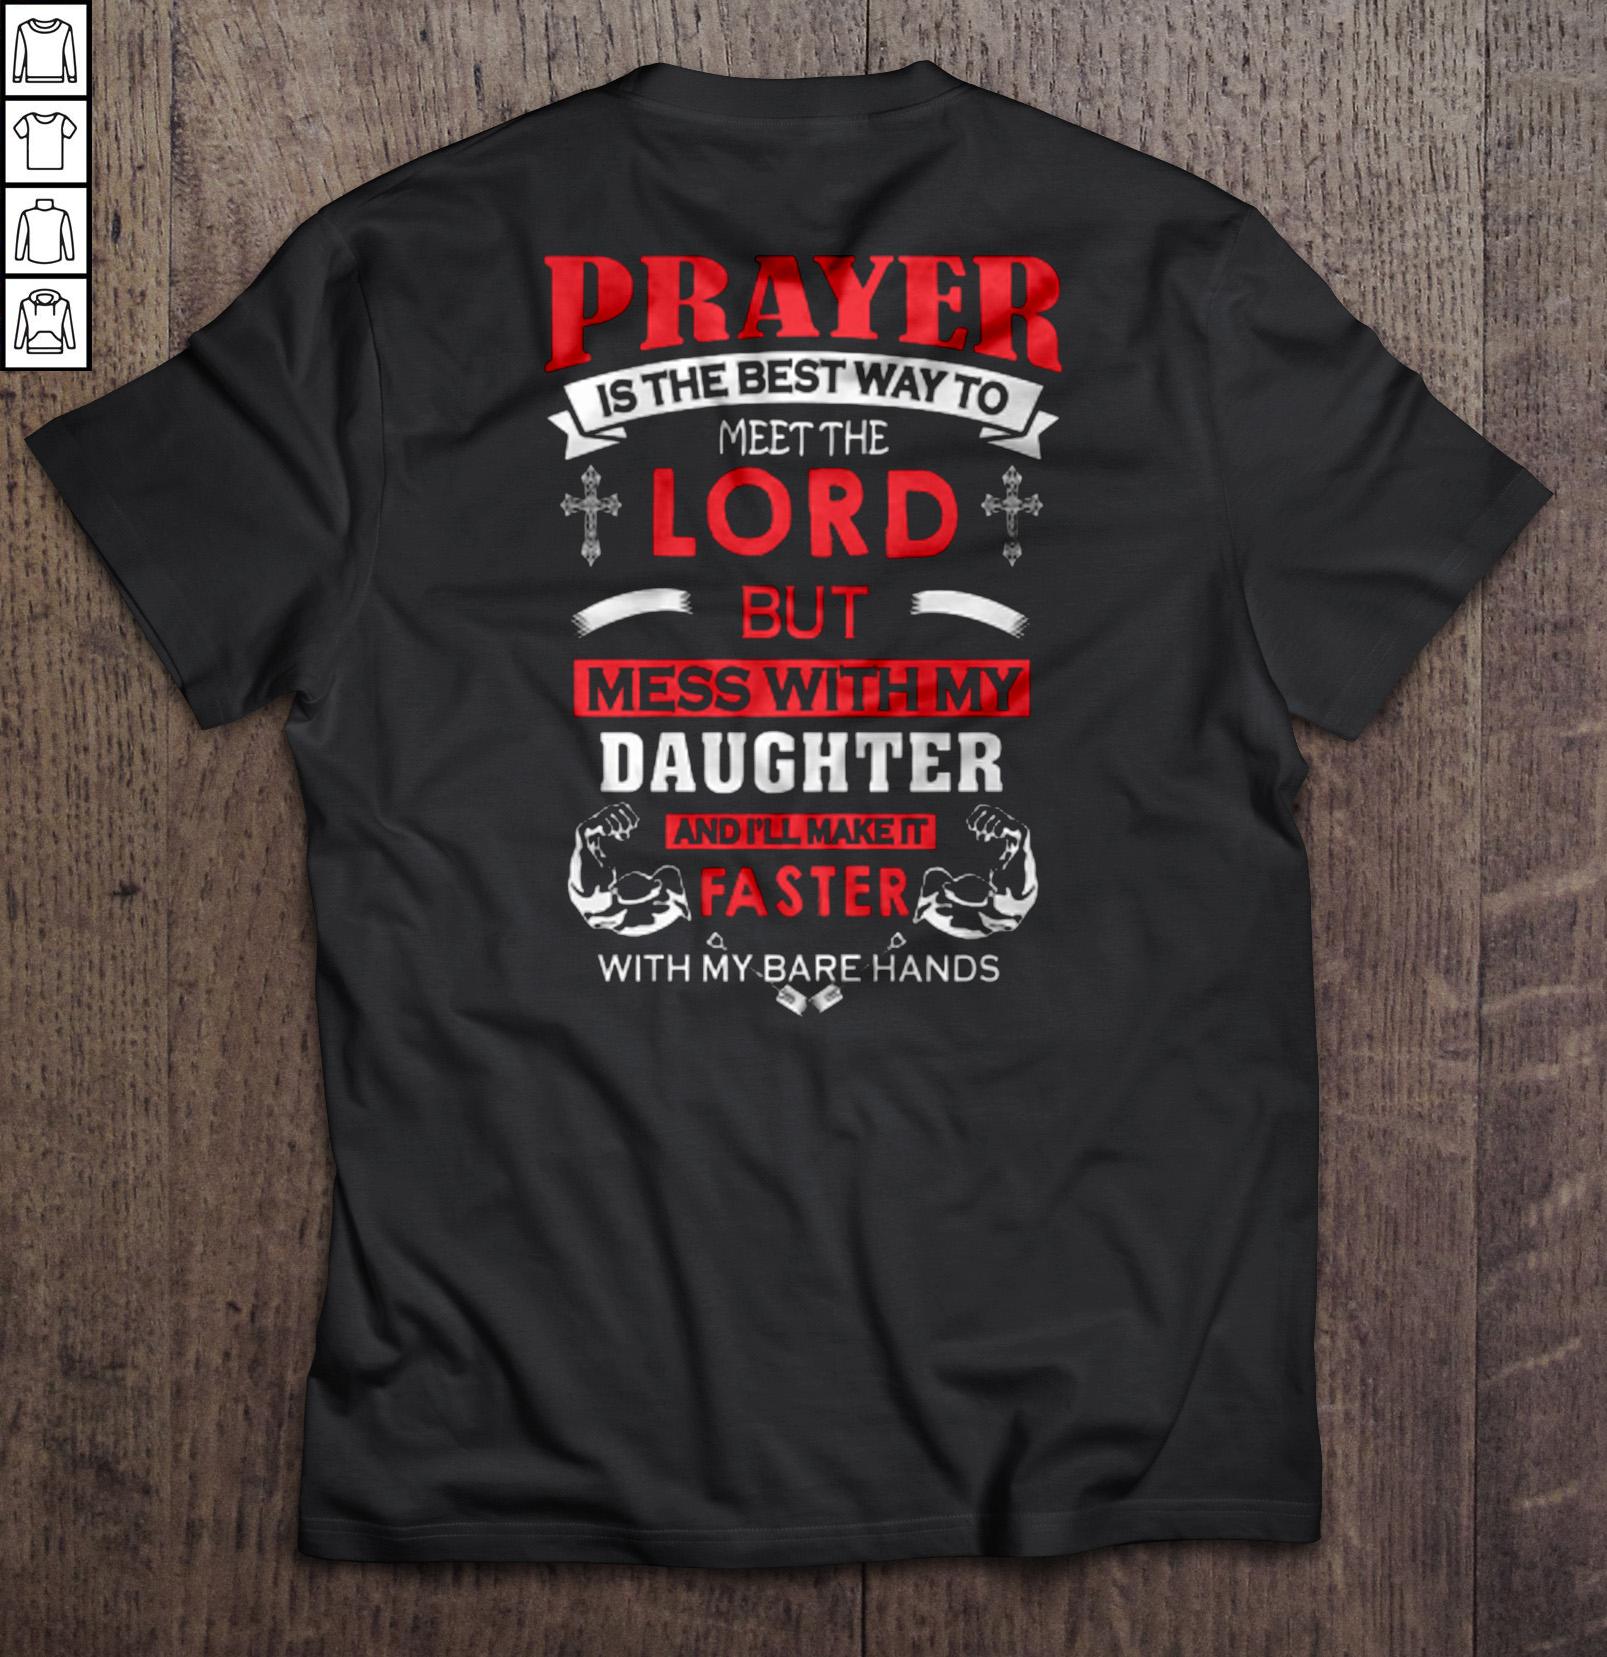 Prayer is the best way to meet the lord But mess with my Daughter and I’ll make it faster with my bare hands TShirt